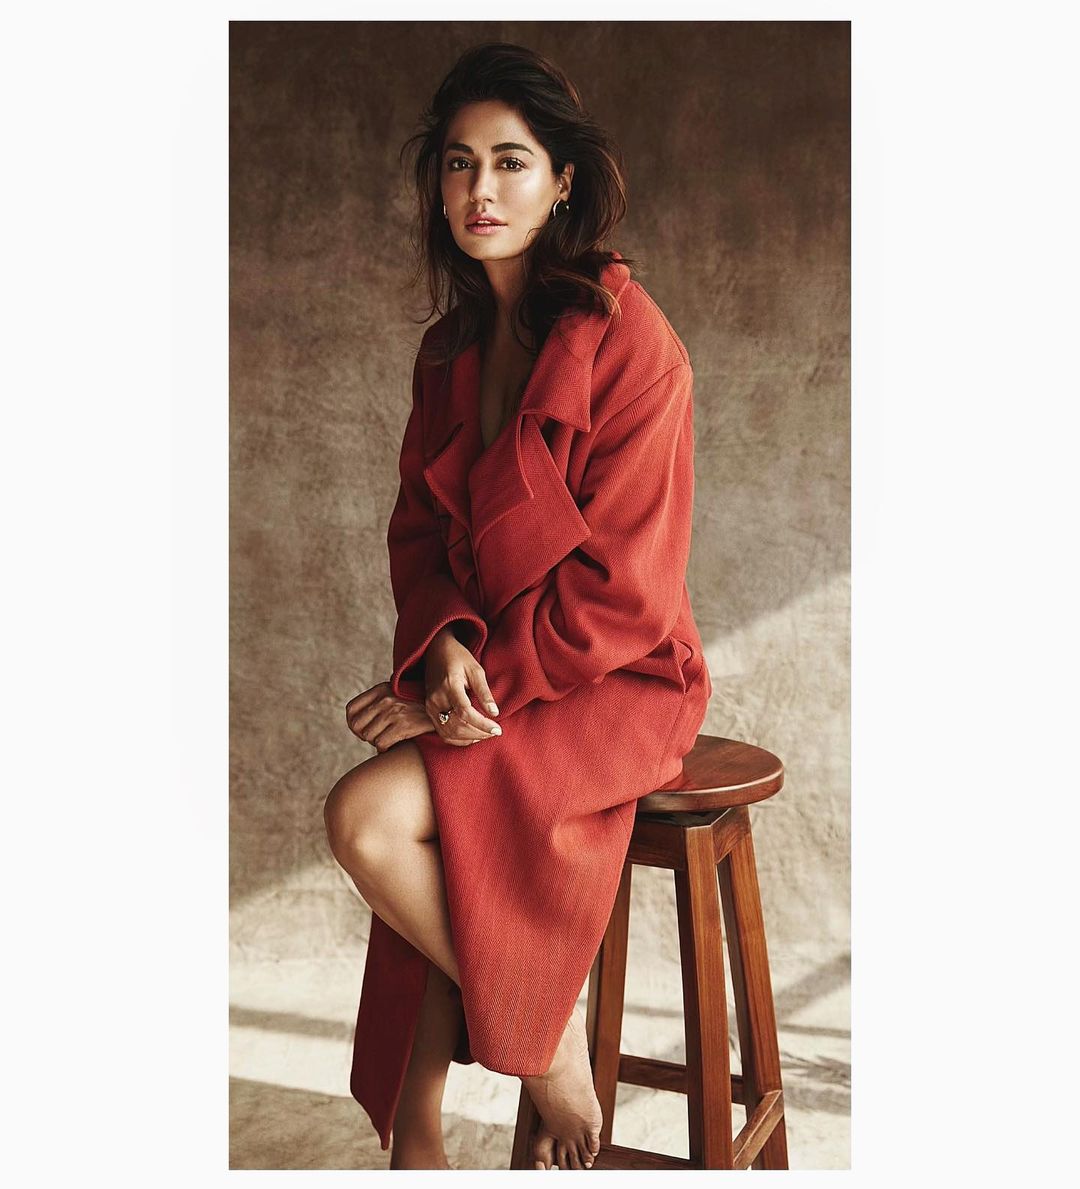 Chitrangda Singh turns up the heat in a red blazer dress